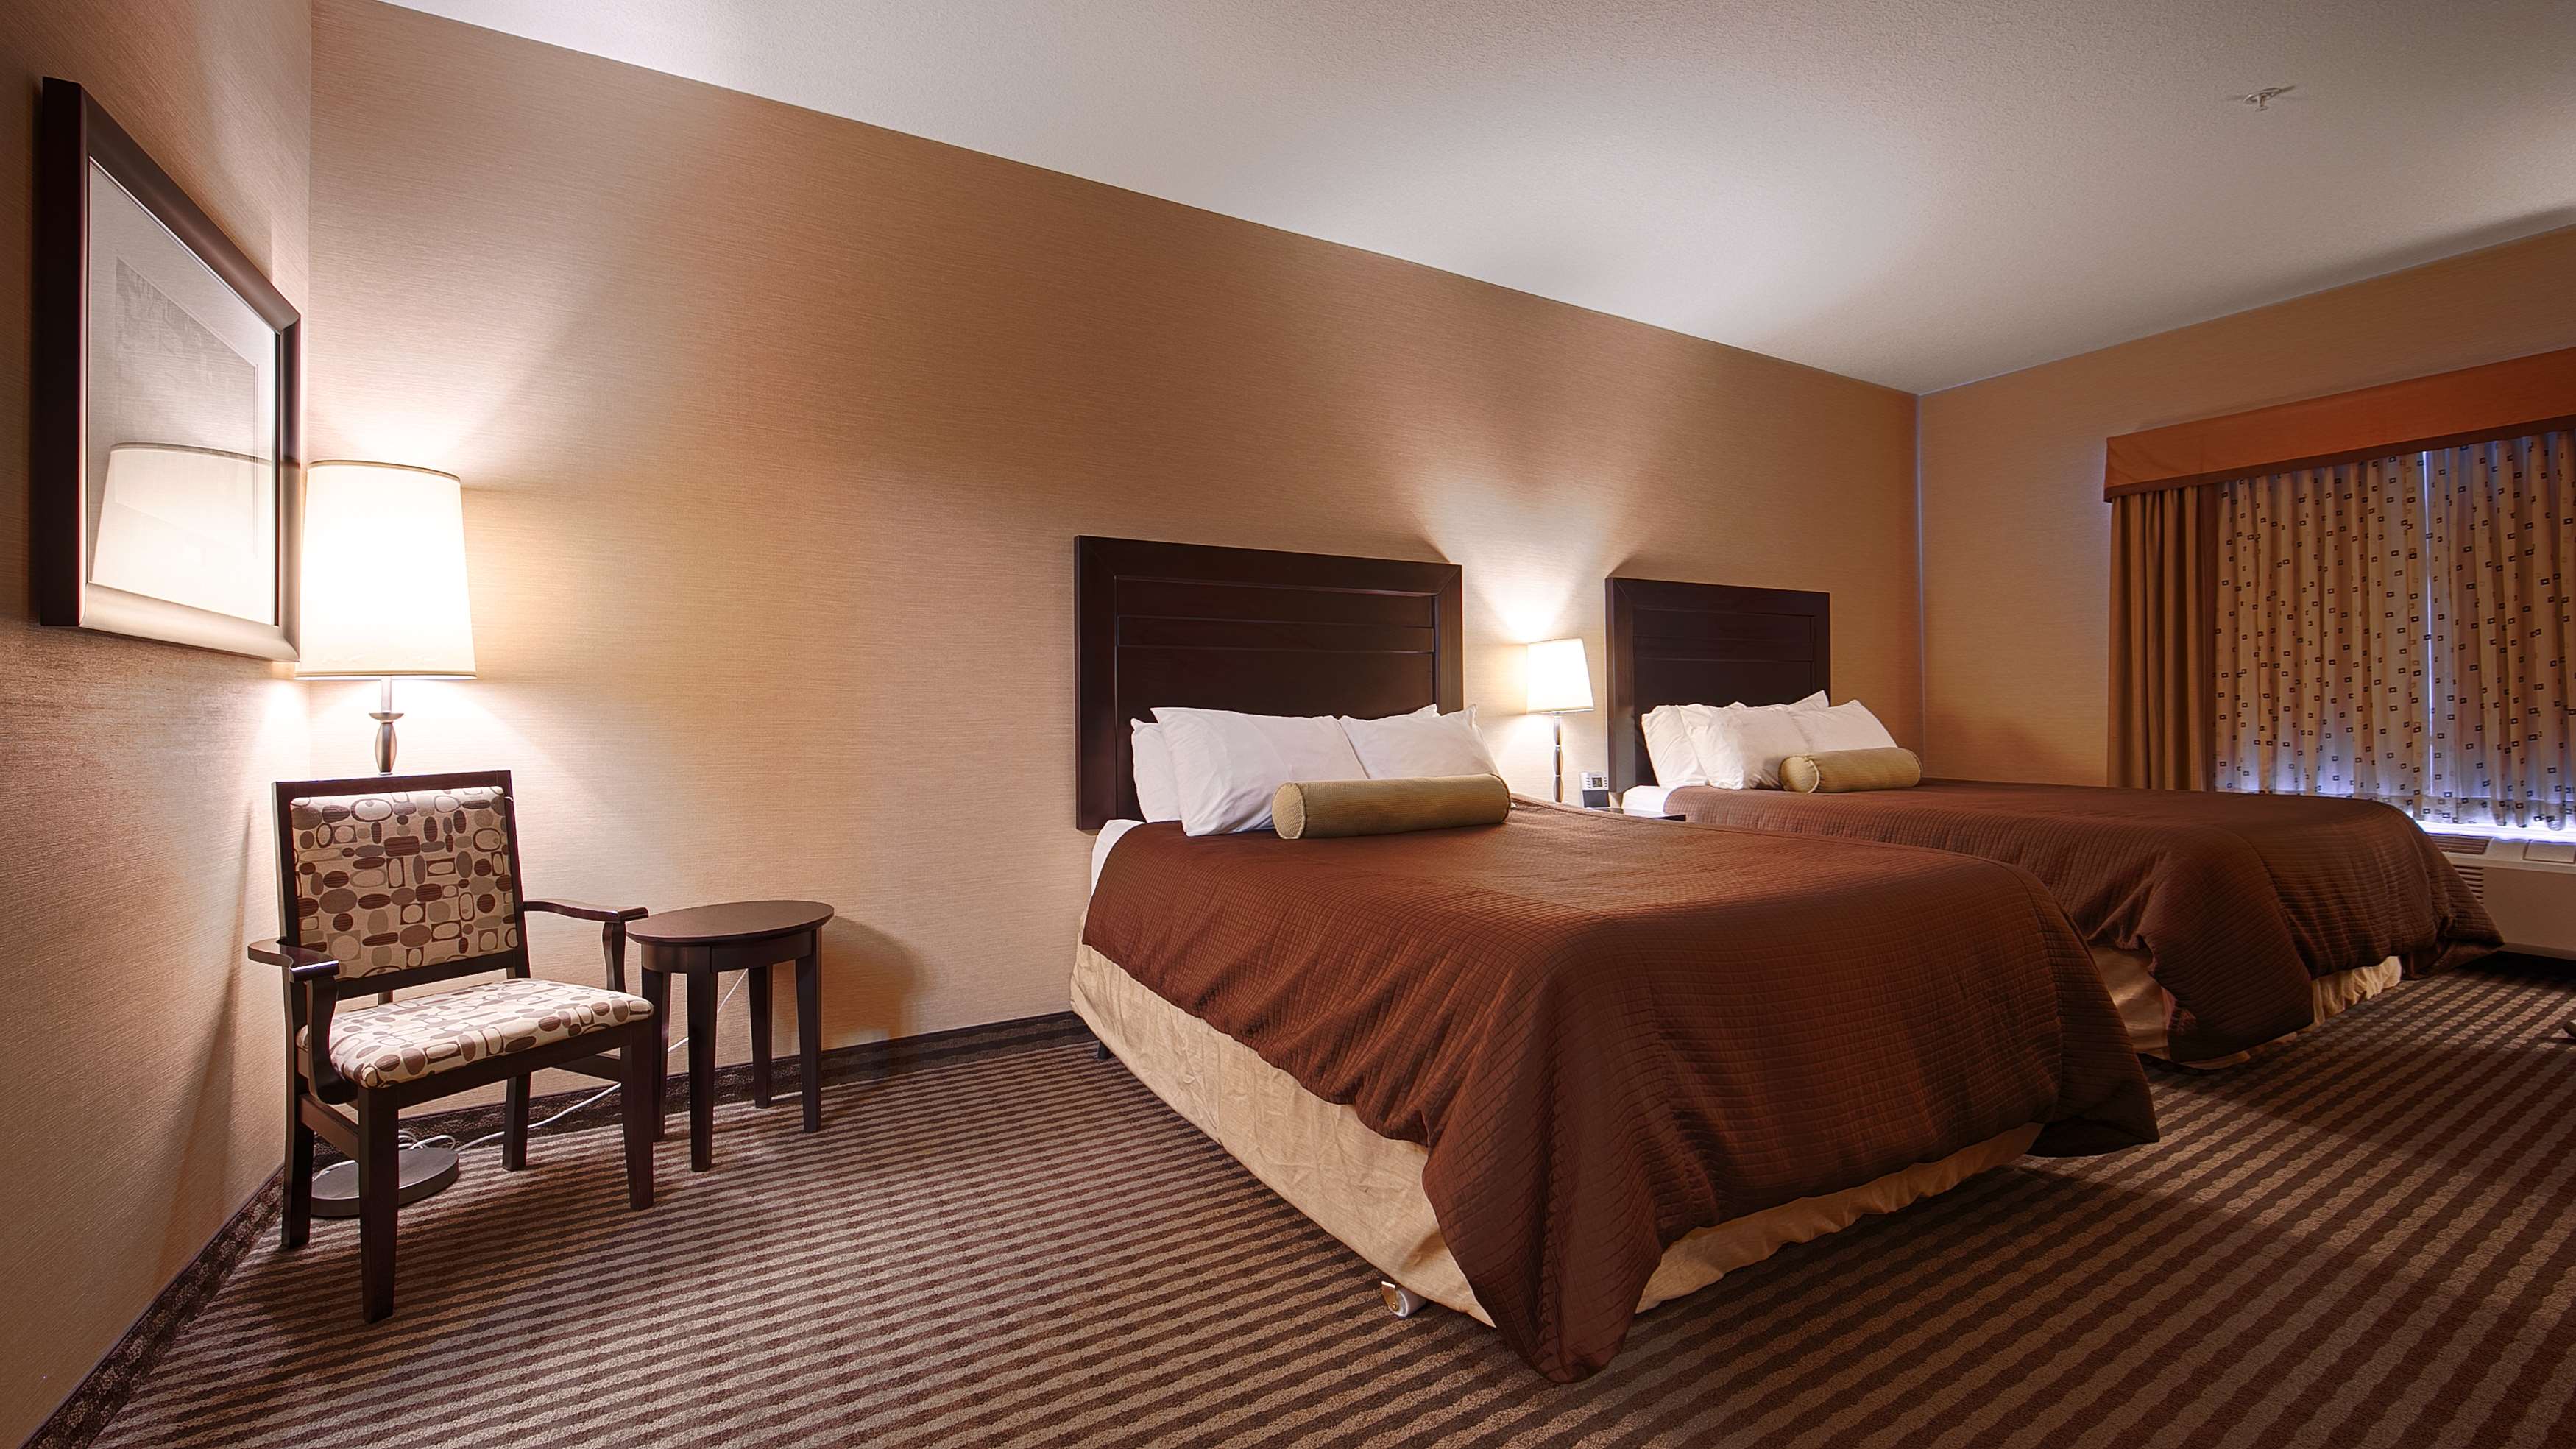 Two Queen Bed Guest Room Best Western Sunrise Inn & Suites Stony Plain (780)968-1716